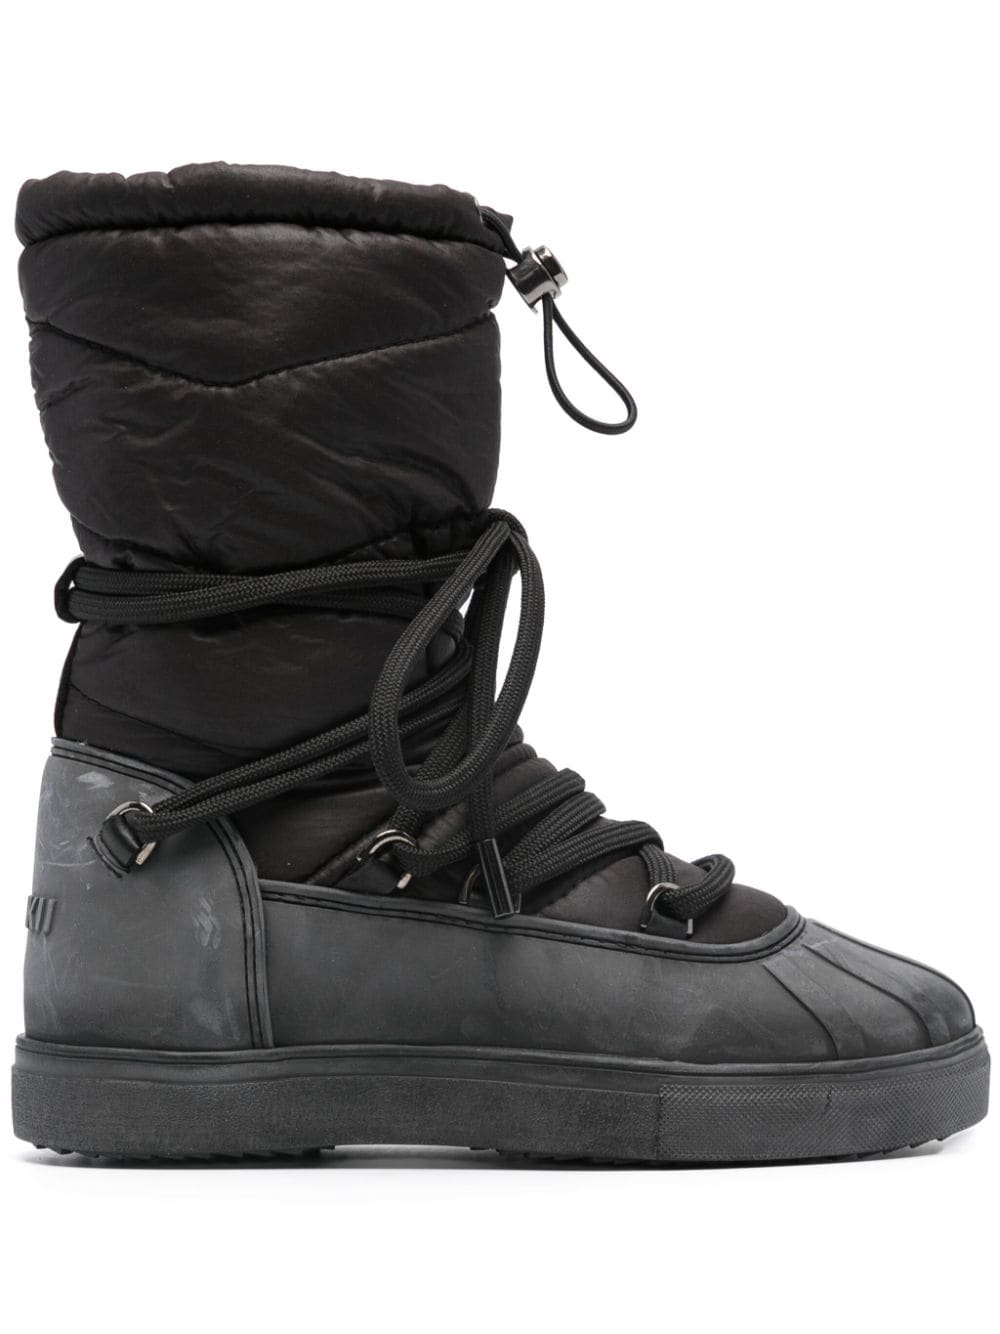 Image 1 of Inuikii Technical Classic padded boots